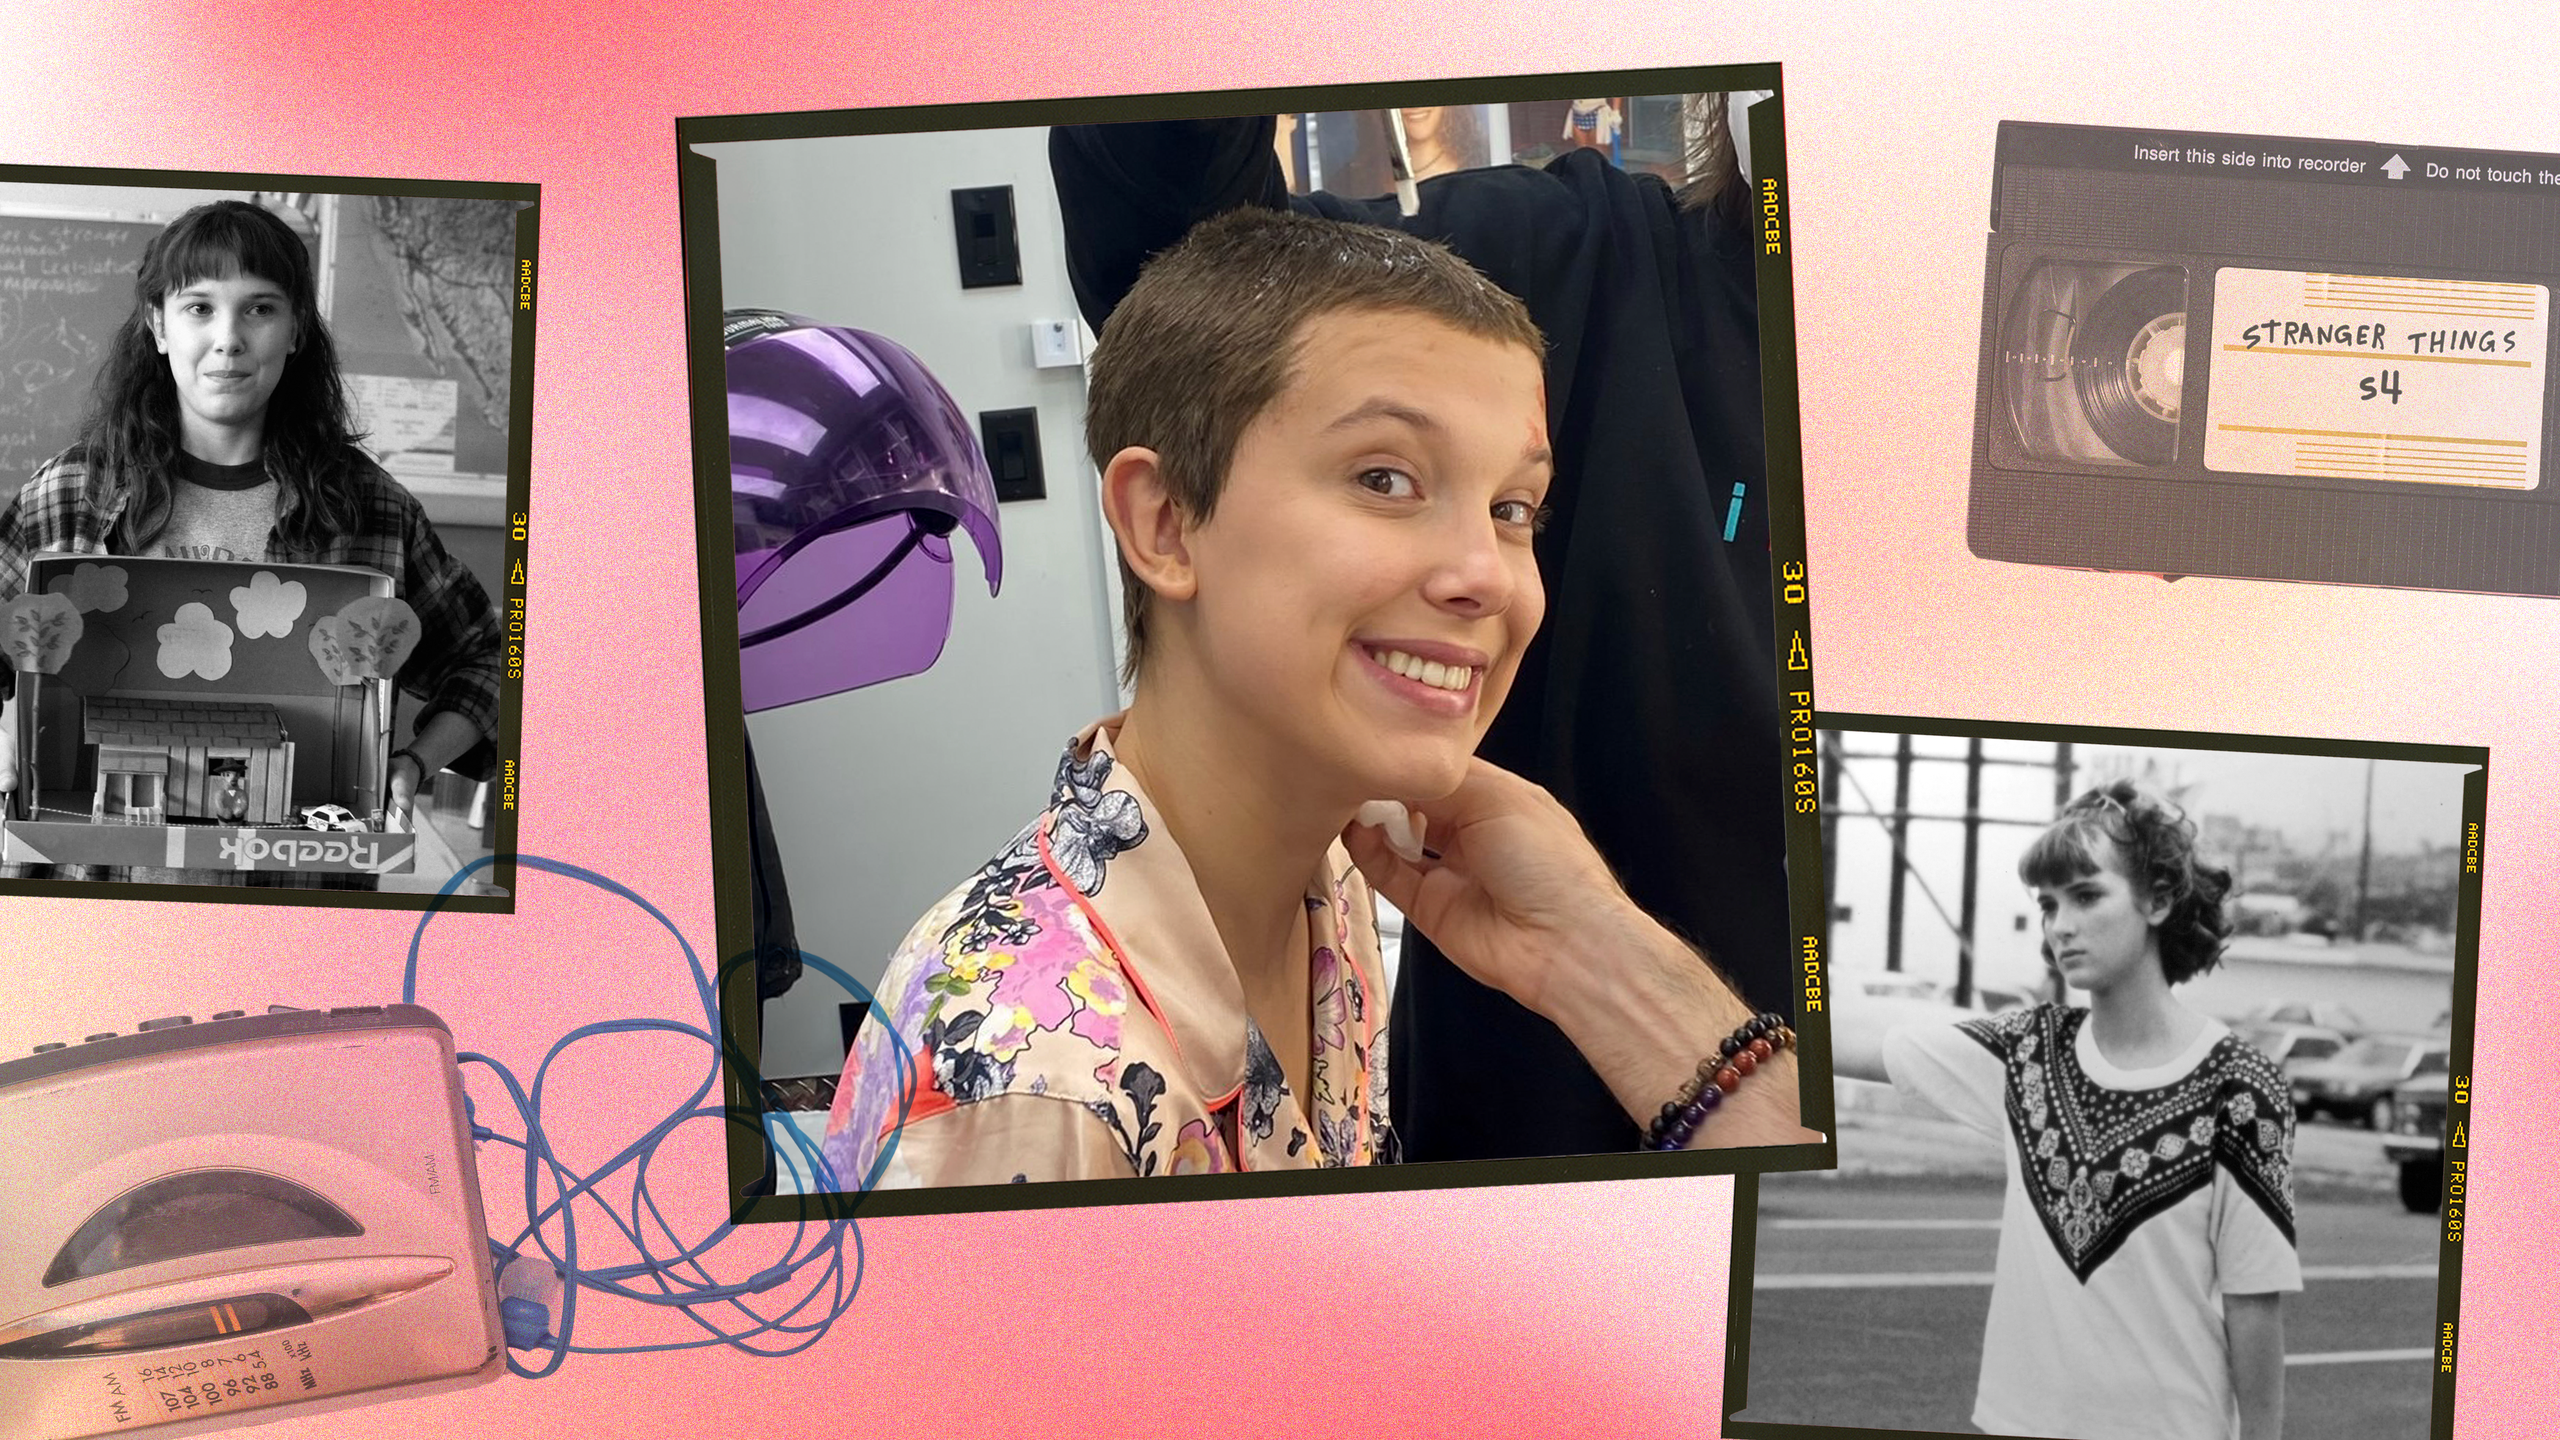 Millie Bobby Brown As Eleven In Stranger Things Logo Wallpapers